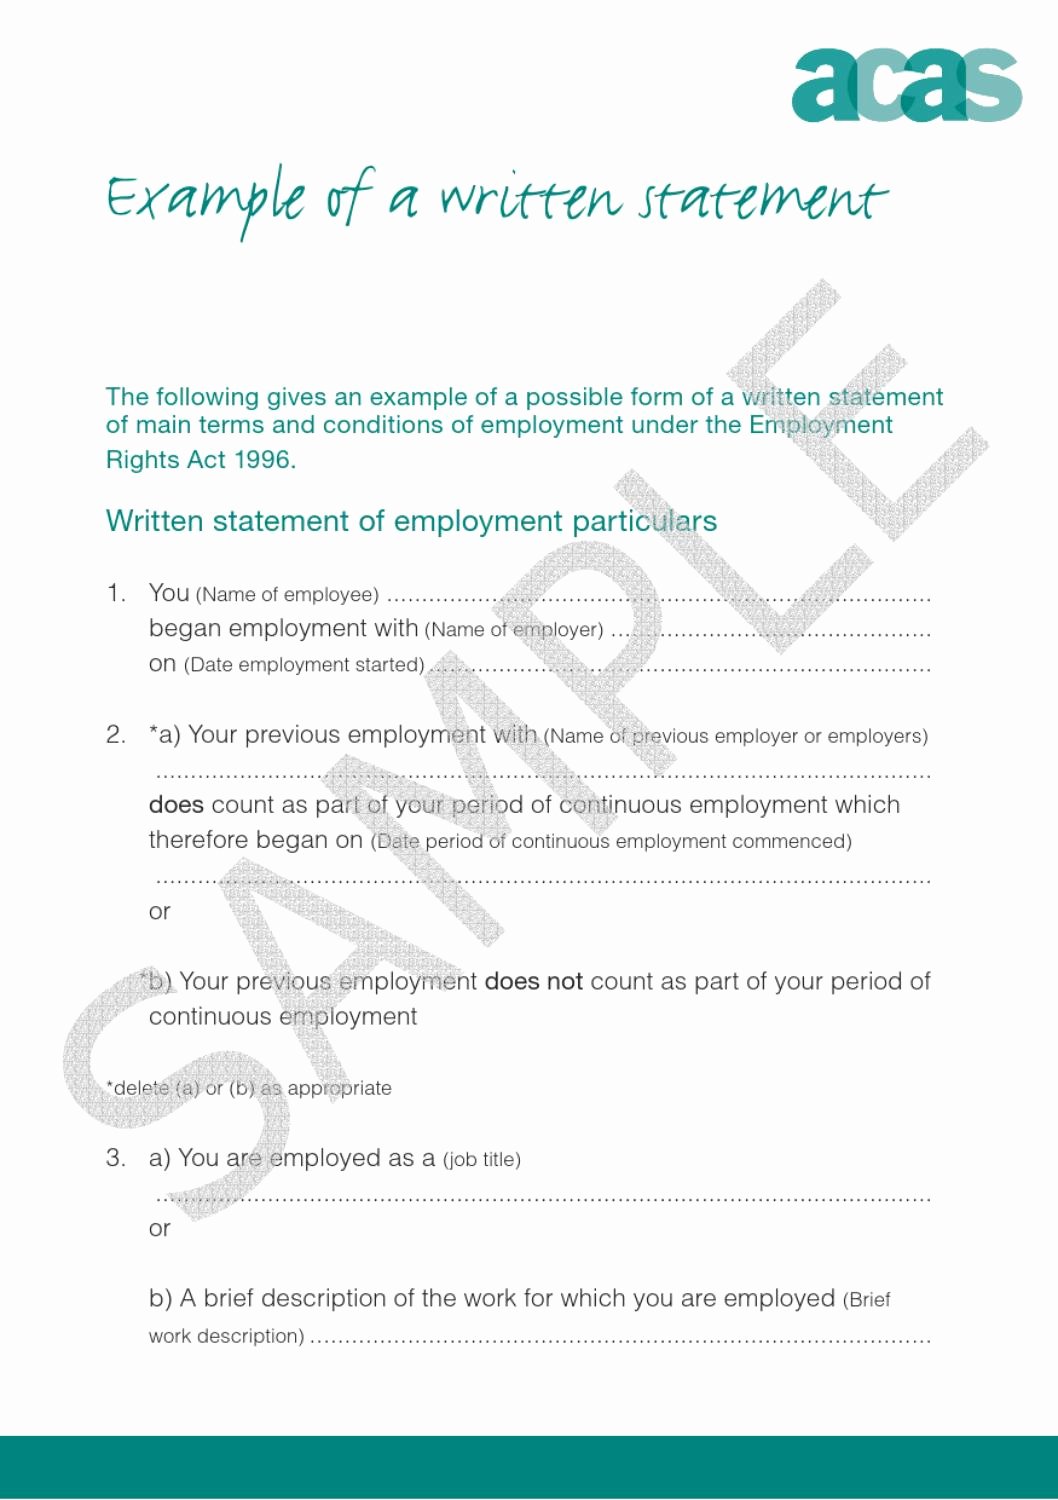 Written Statement Samples Lovely Example Of Written Statement Of Employment by Len Gair issuu